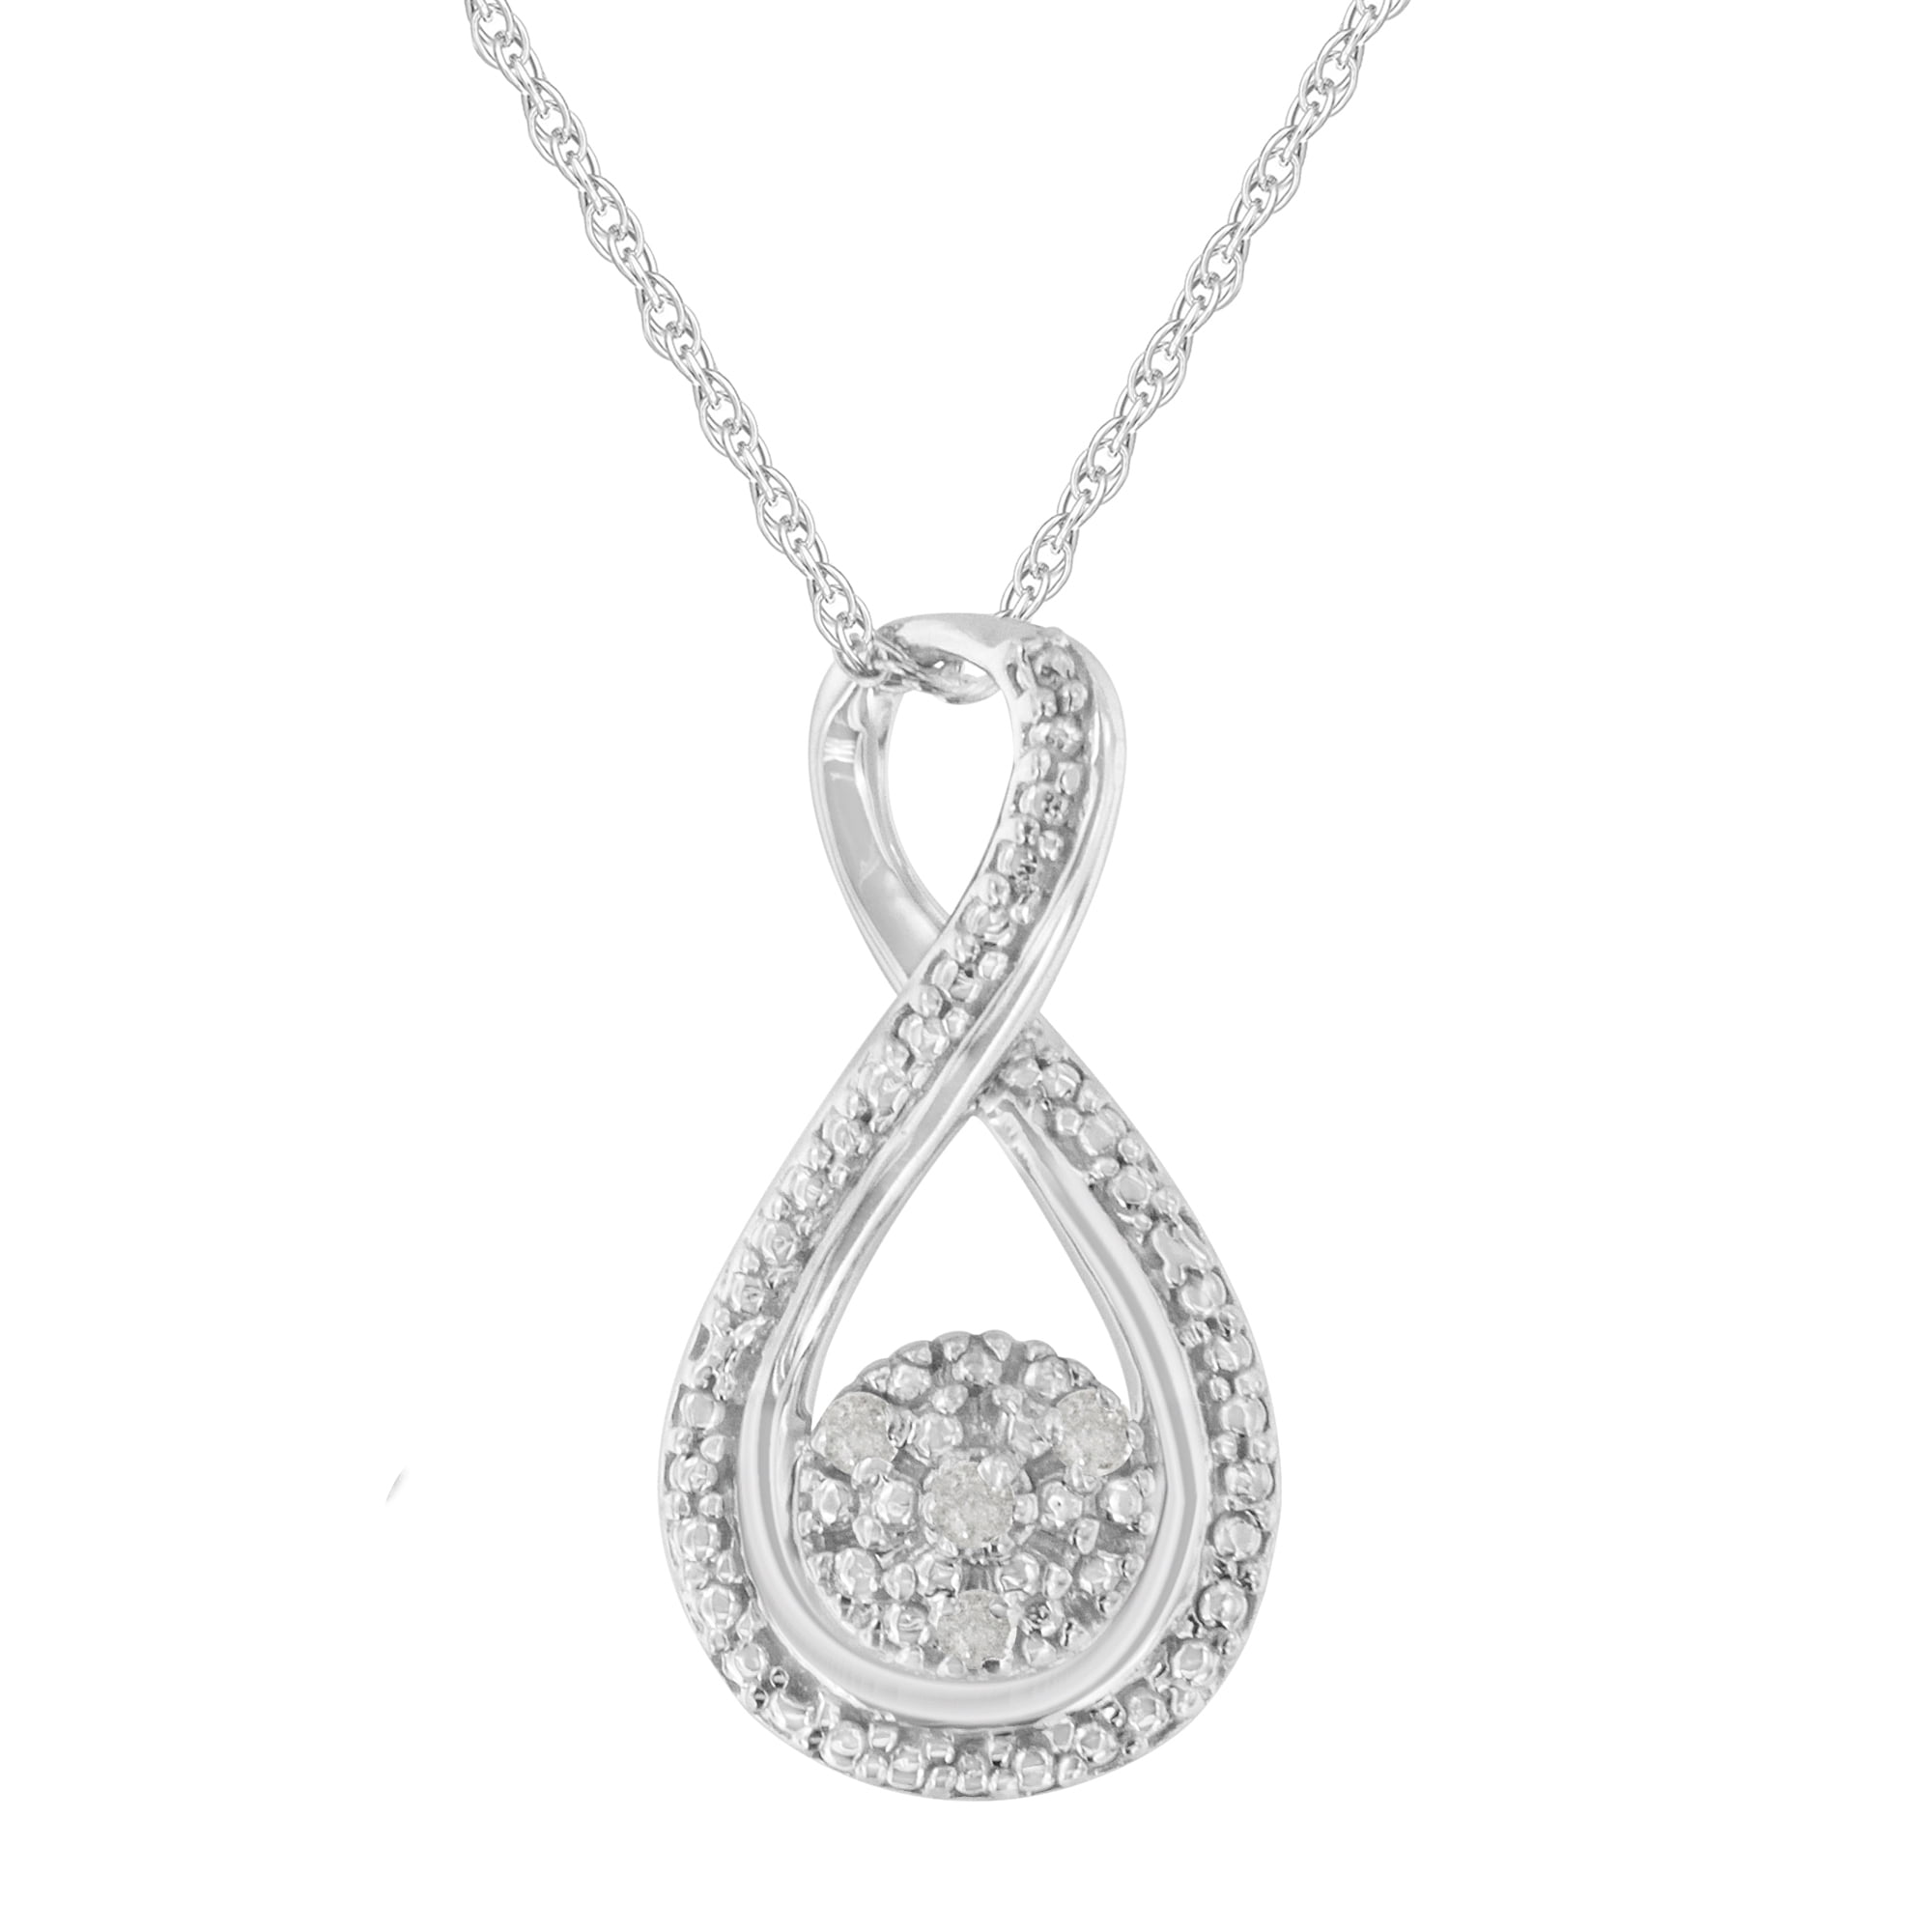 925 Sterling Silver Diamond Accent Small Key Pendant on 18" Chain Necklace 